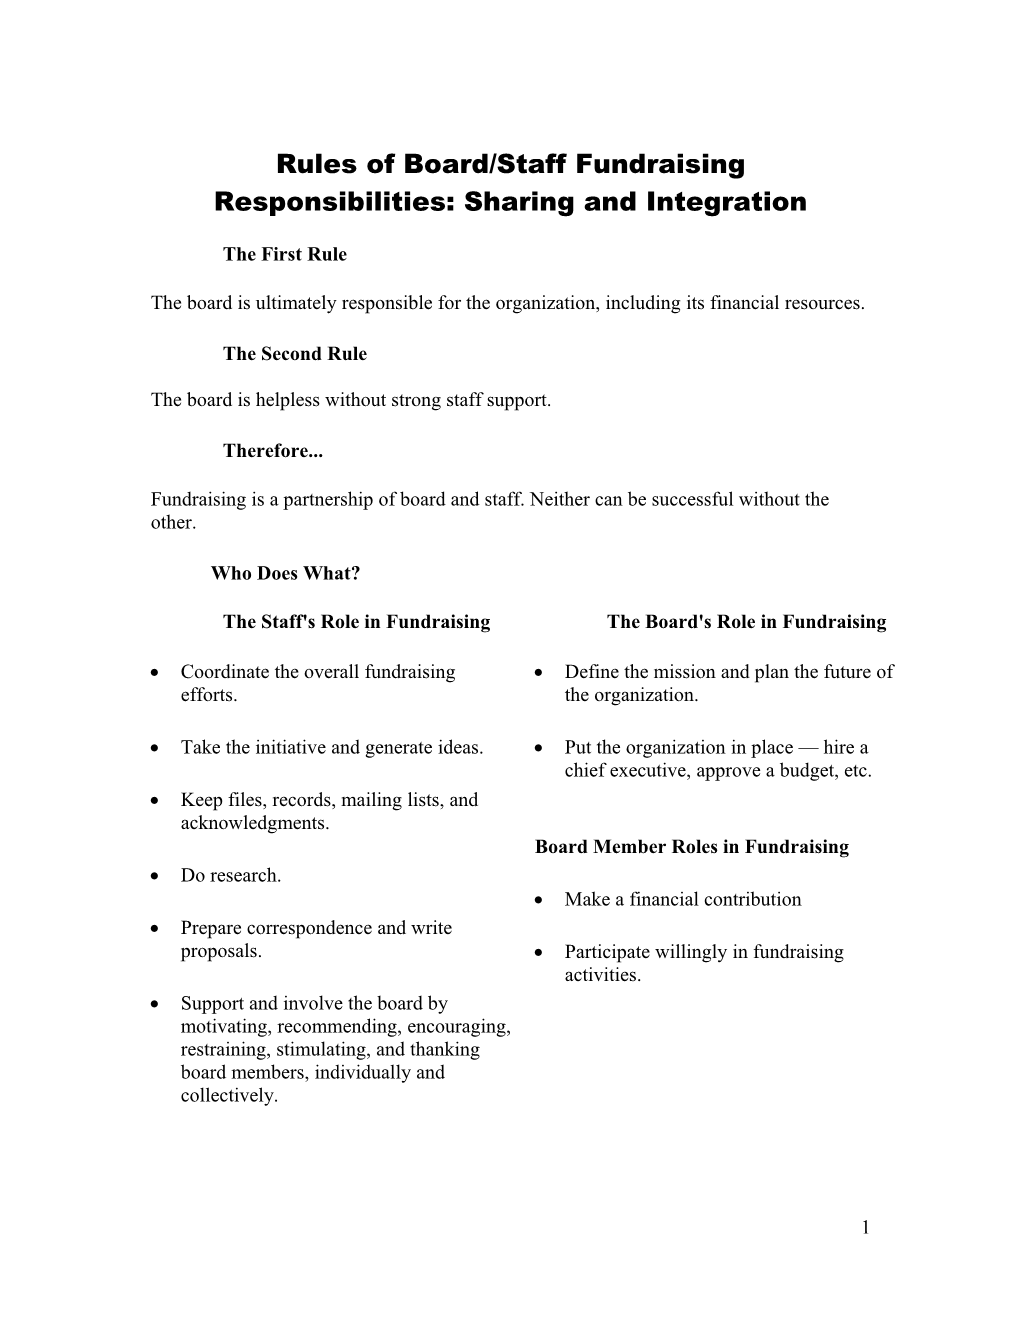 Rules of Board/Staff Fundraising Responsibilities: Sharing and Integration